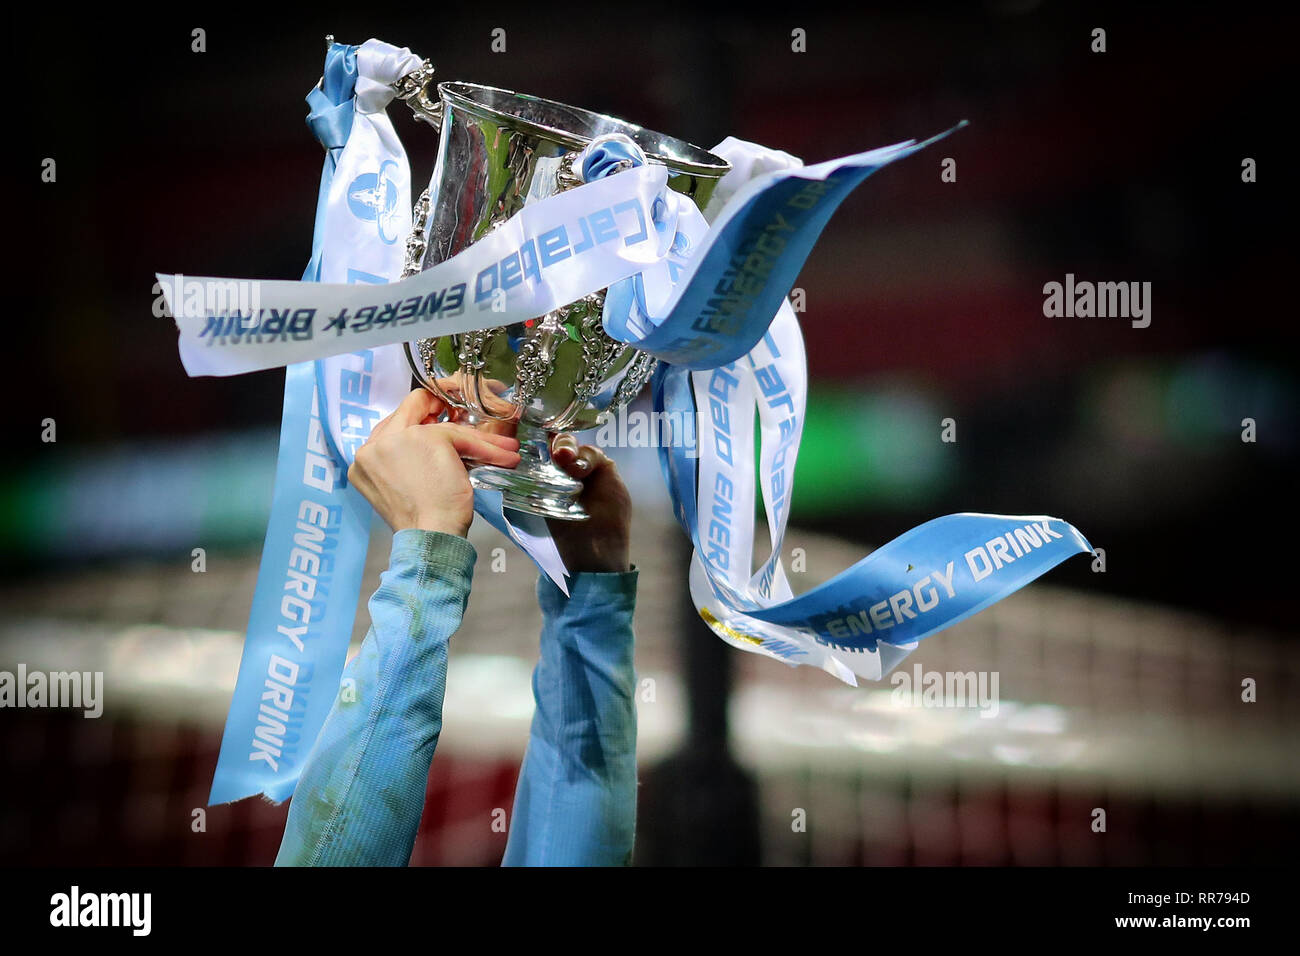 London, UK. 24th Feb, 2019. The League Cup Trophy held aloft in the colours of Manchester City - Chelsea v Manchester City, Carabao Cup Final, Wembley Stadium, London (Wembley) - 24th February 2019 Editorial Use Only - DataCo restrictions apply Credit: MatchDay Images Limited/Alamy Live News Stock Photo